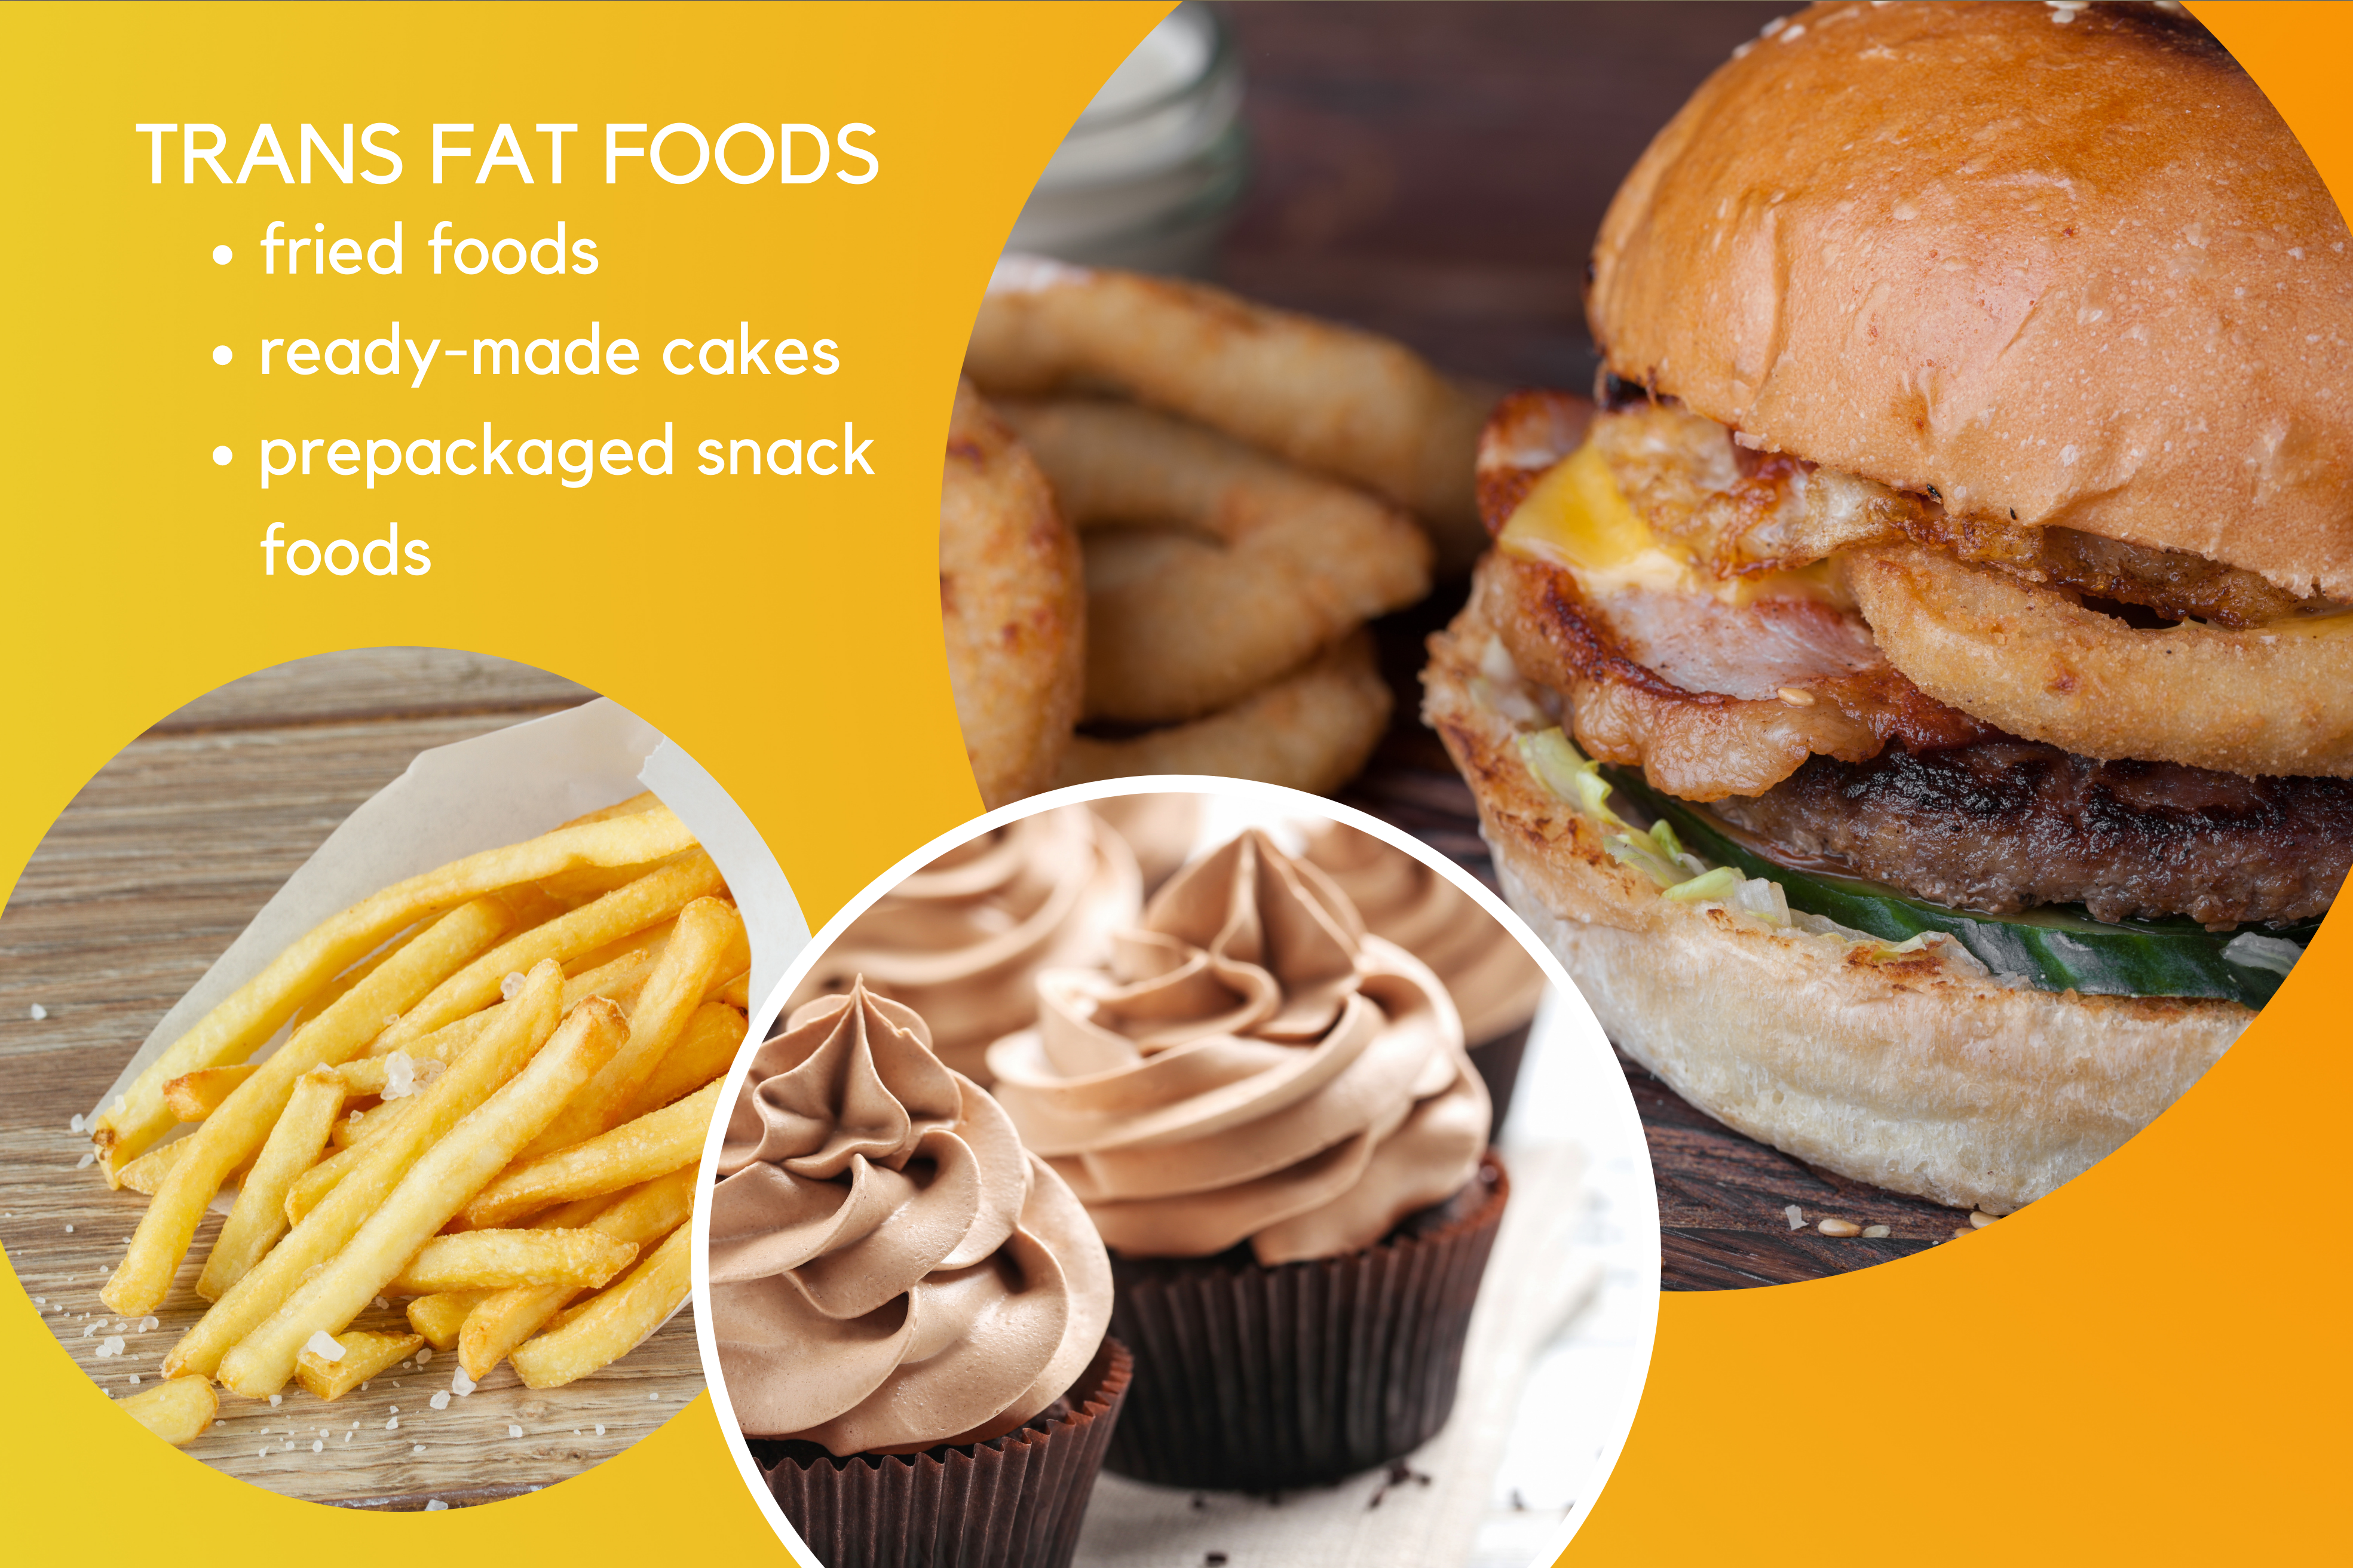 avoid foods high in trans fat